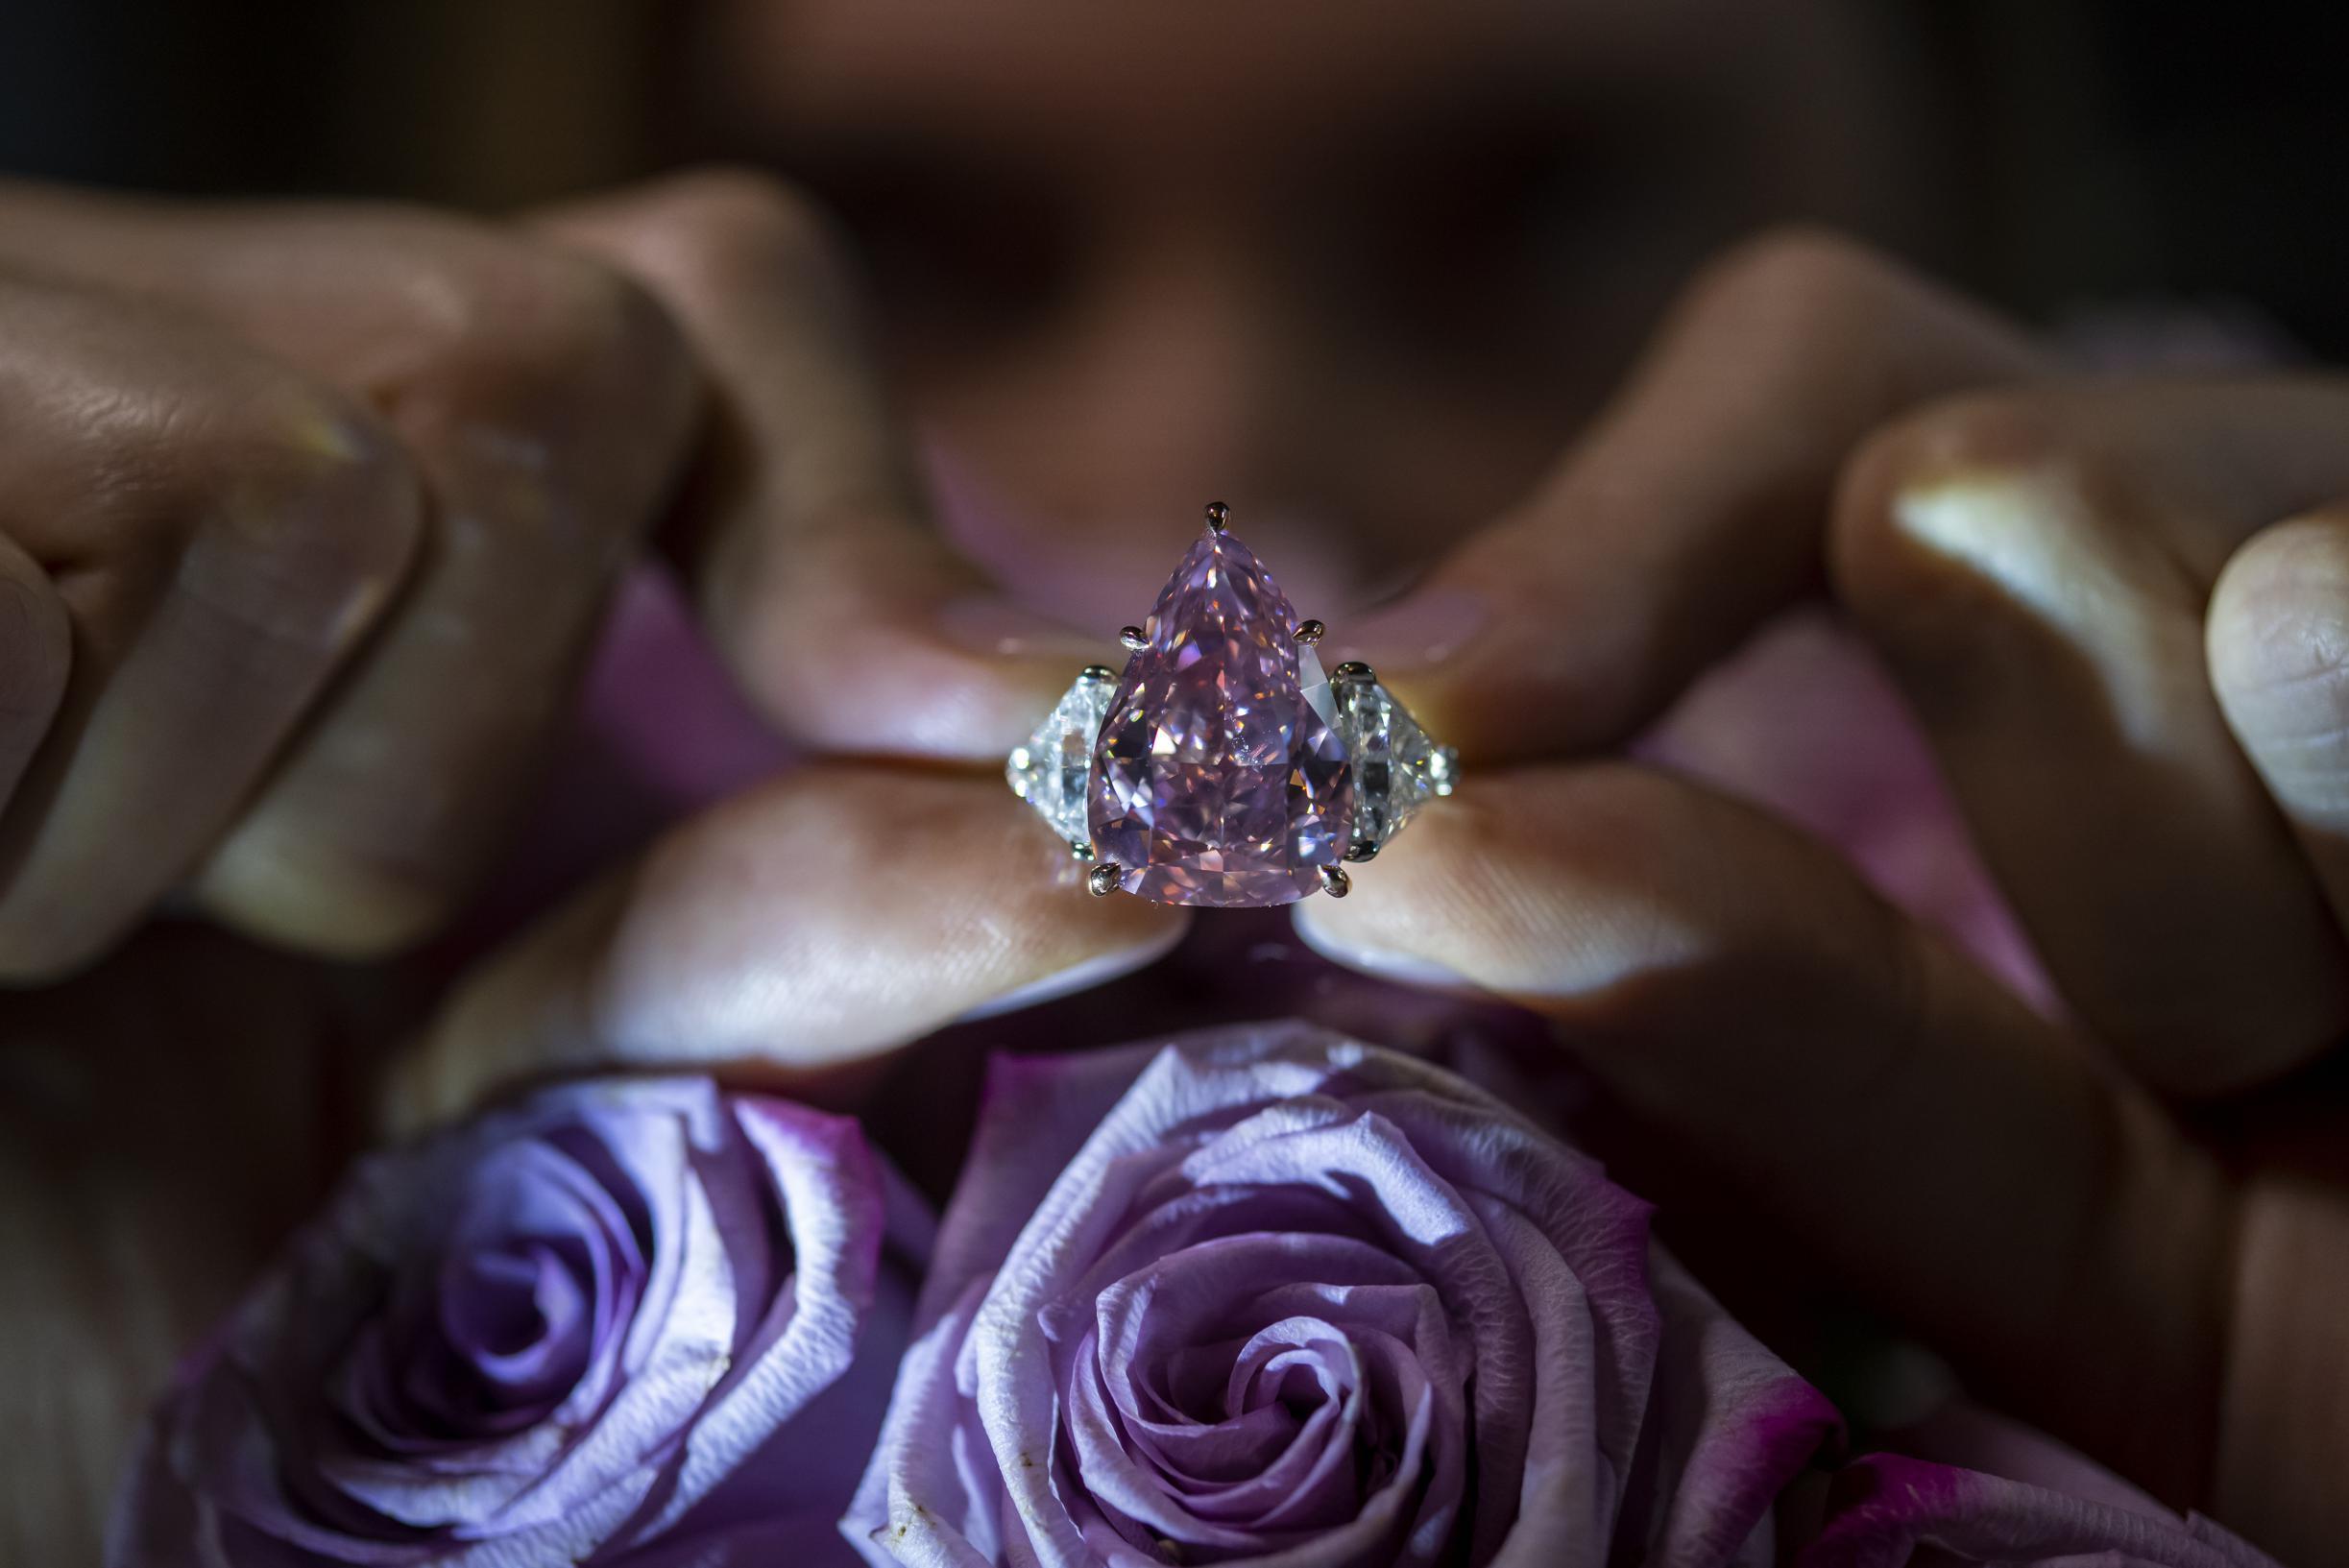 Giant pink diamond Fortune Pink auctioned for 28.6 million euros